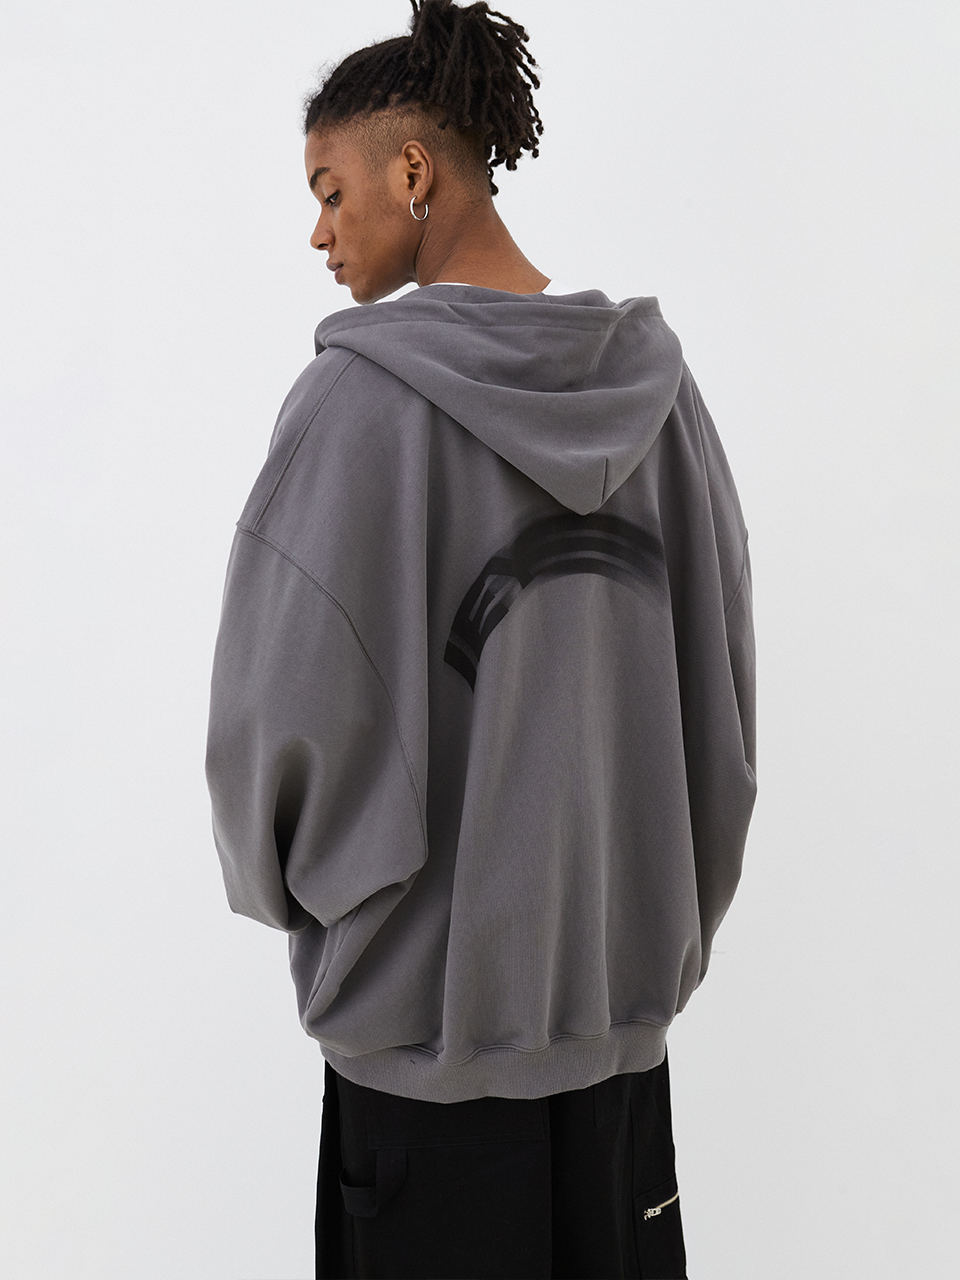 IEY - OVER MOTION LOGO HOODIE ZIP-UP Charcoal